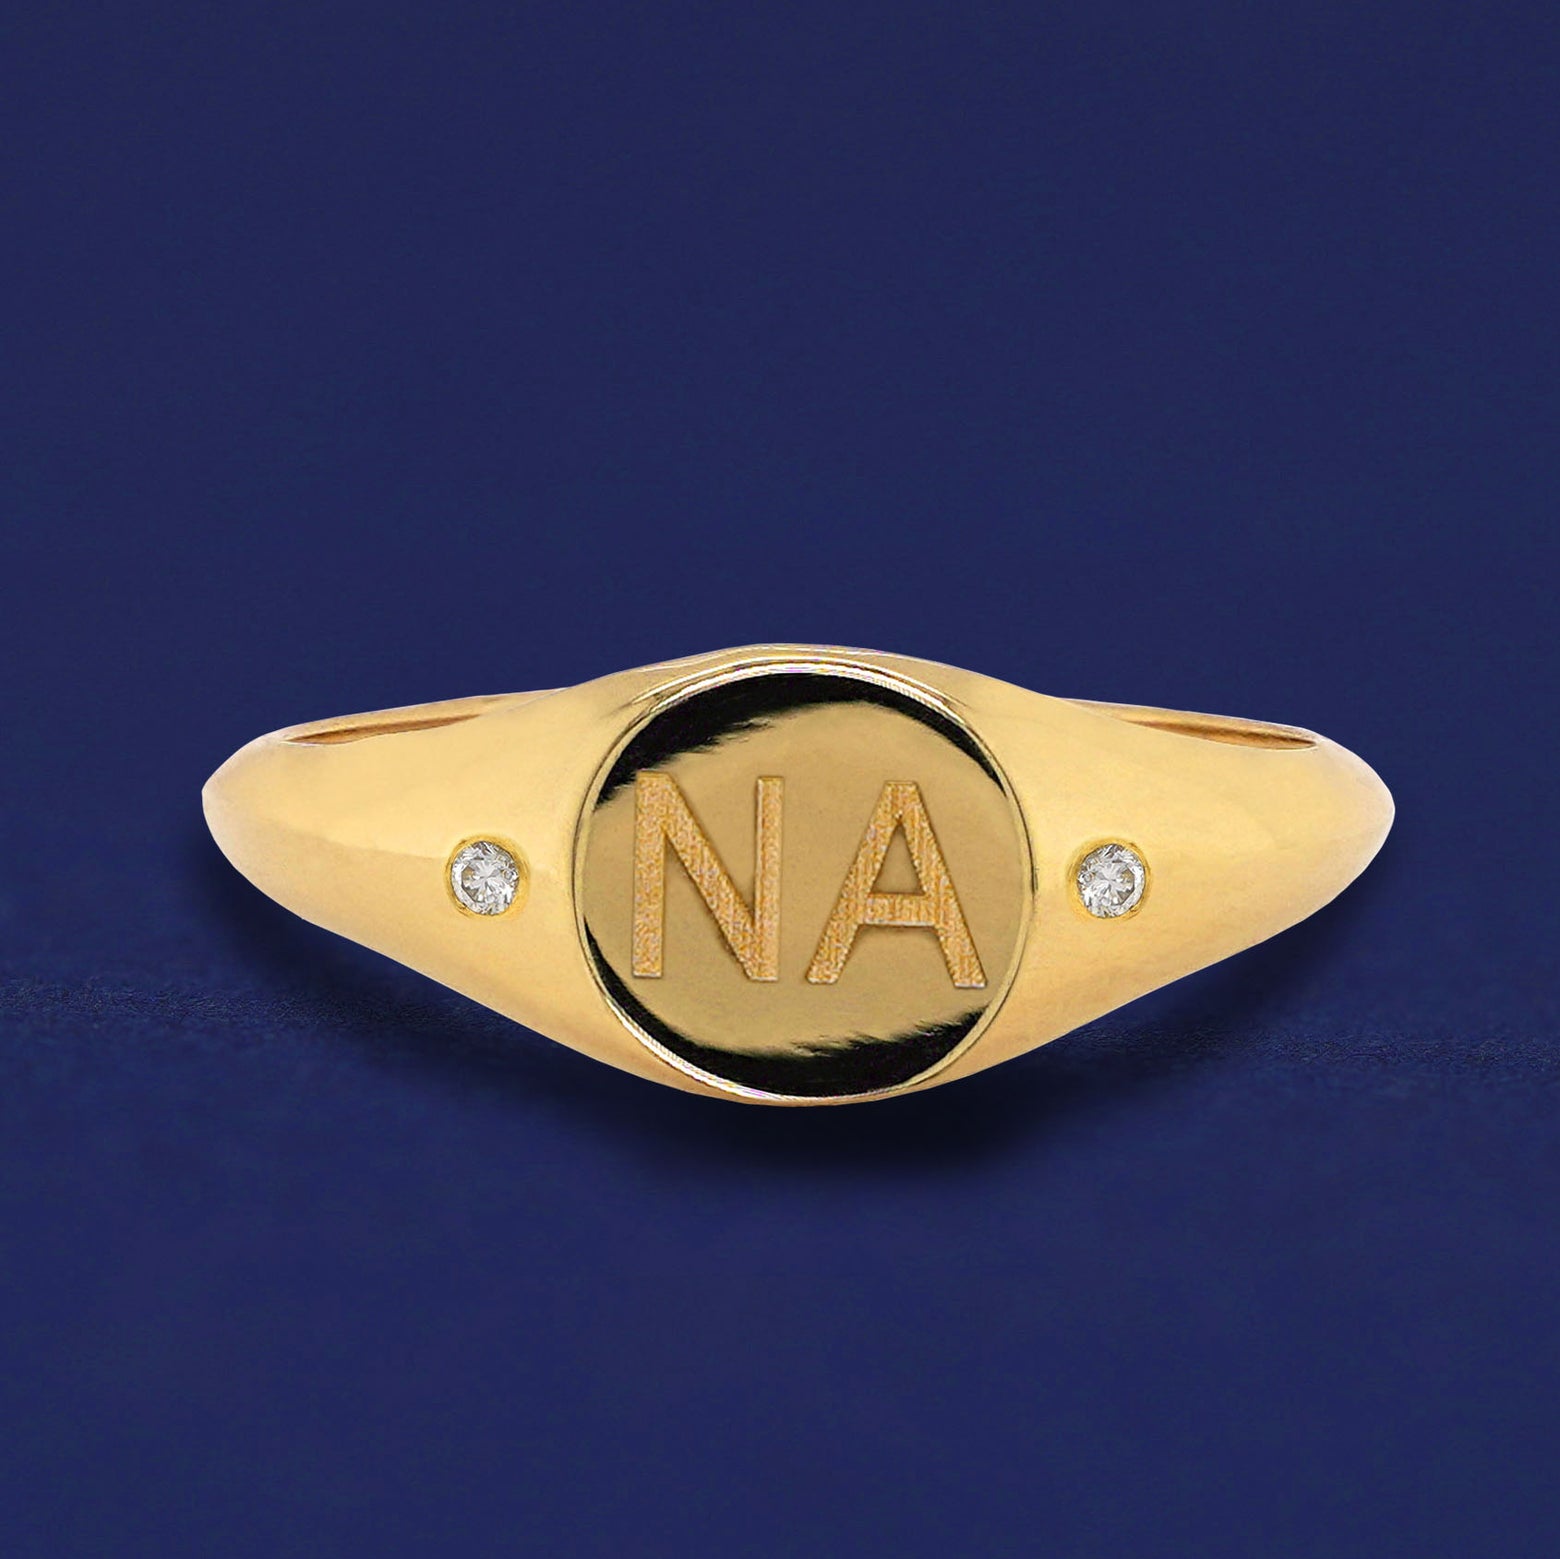 A solid yellow gold Diamond Signet Ring with the initials N A engraved on the top in a block font